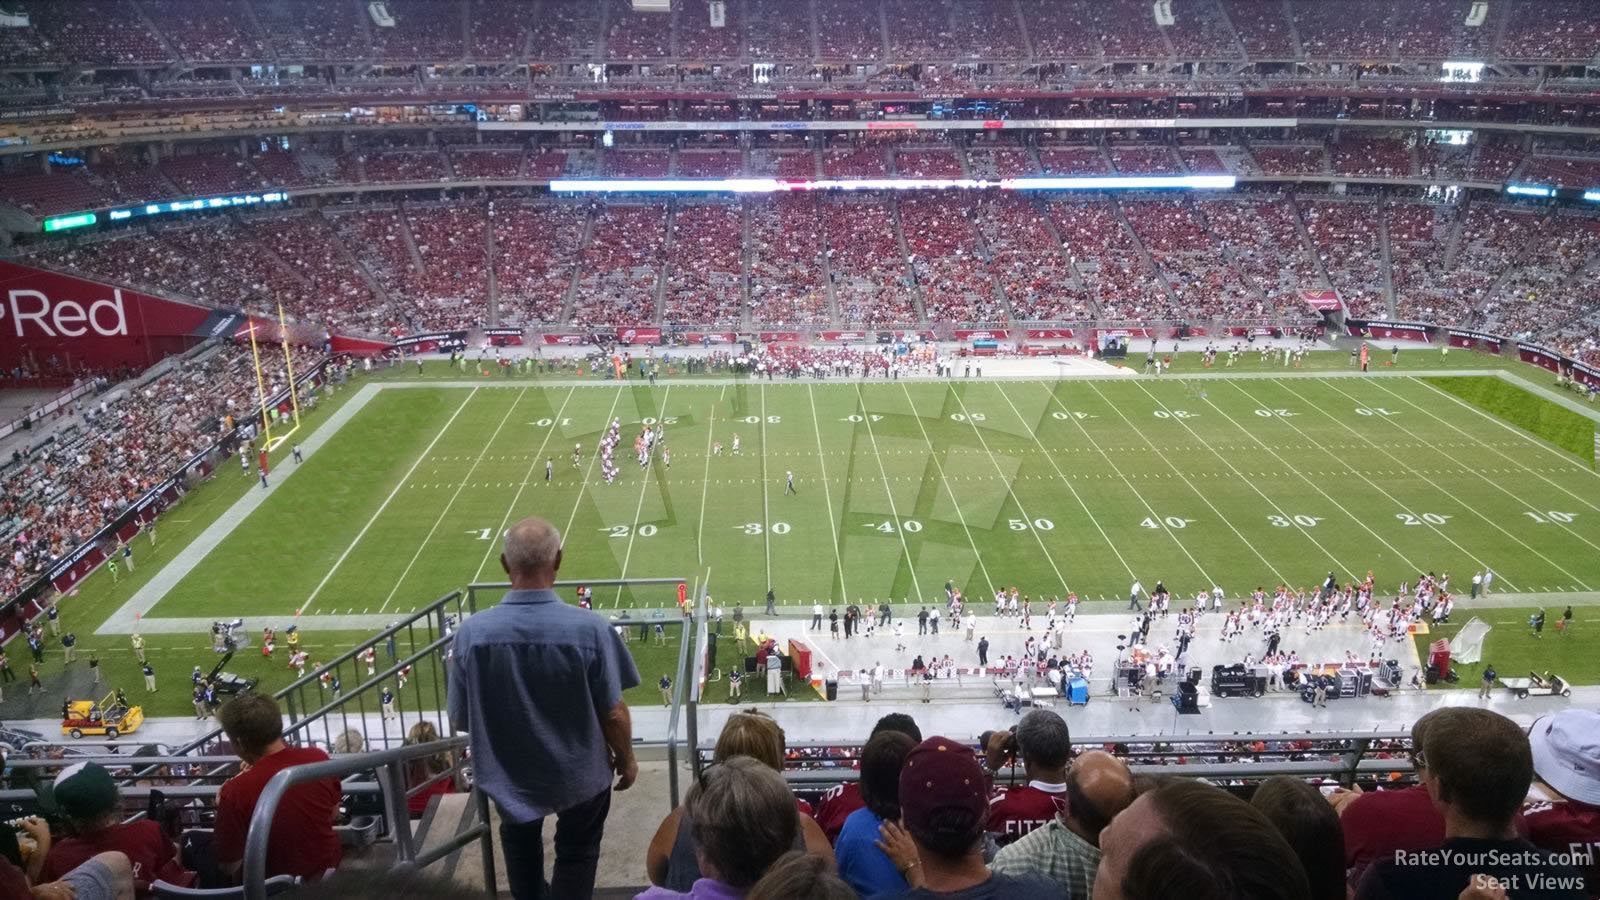 section 445, row 5 seat view  for football - state farm stadium